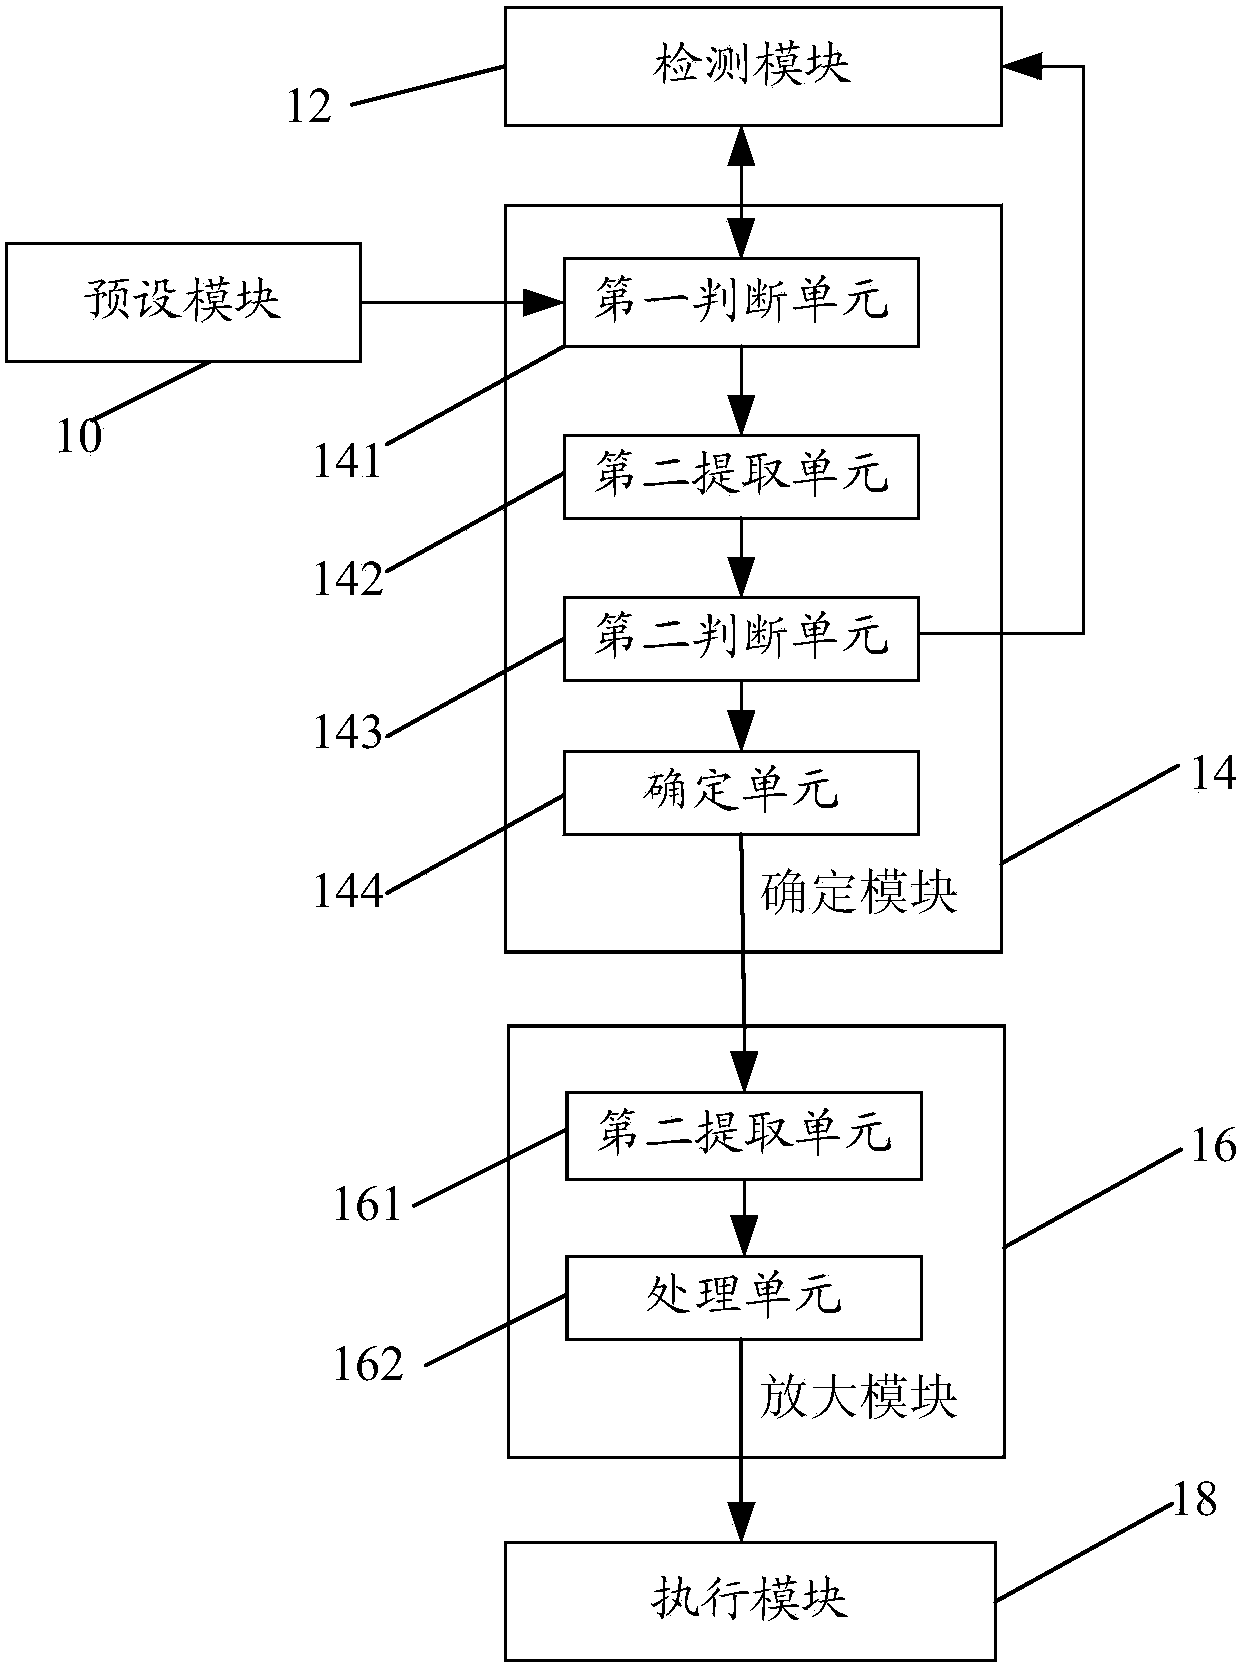 Mistaken touch preventing method and mobile terminal